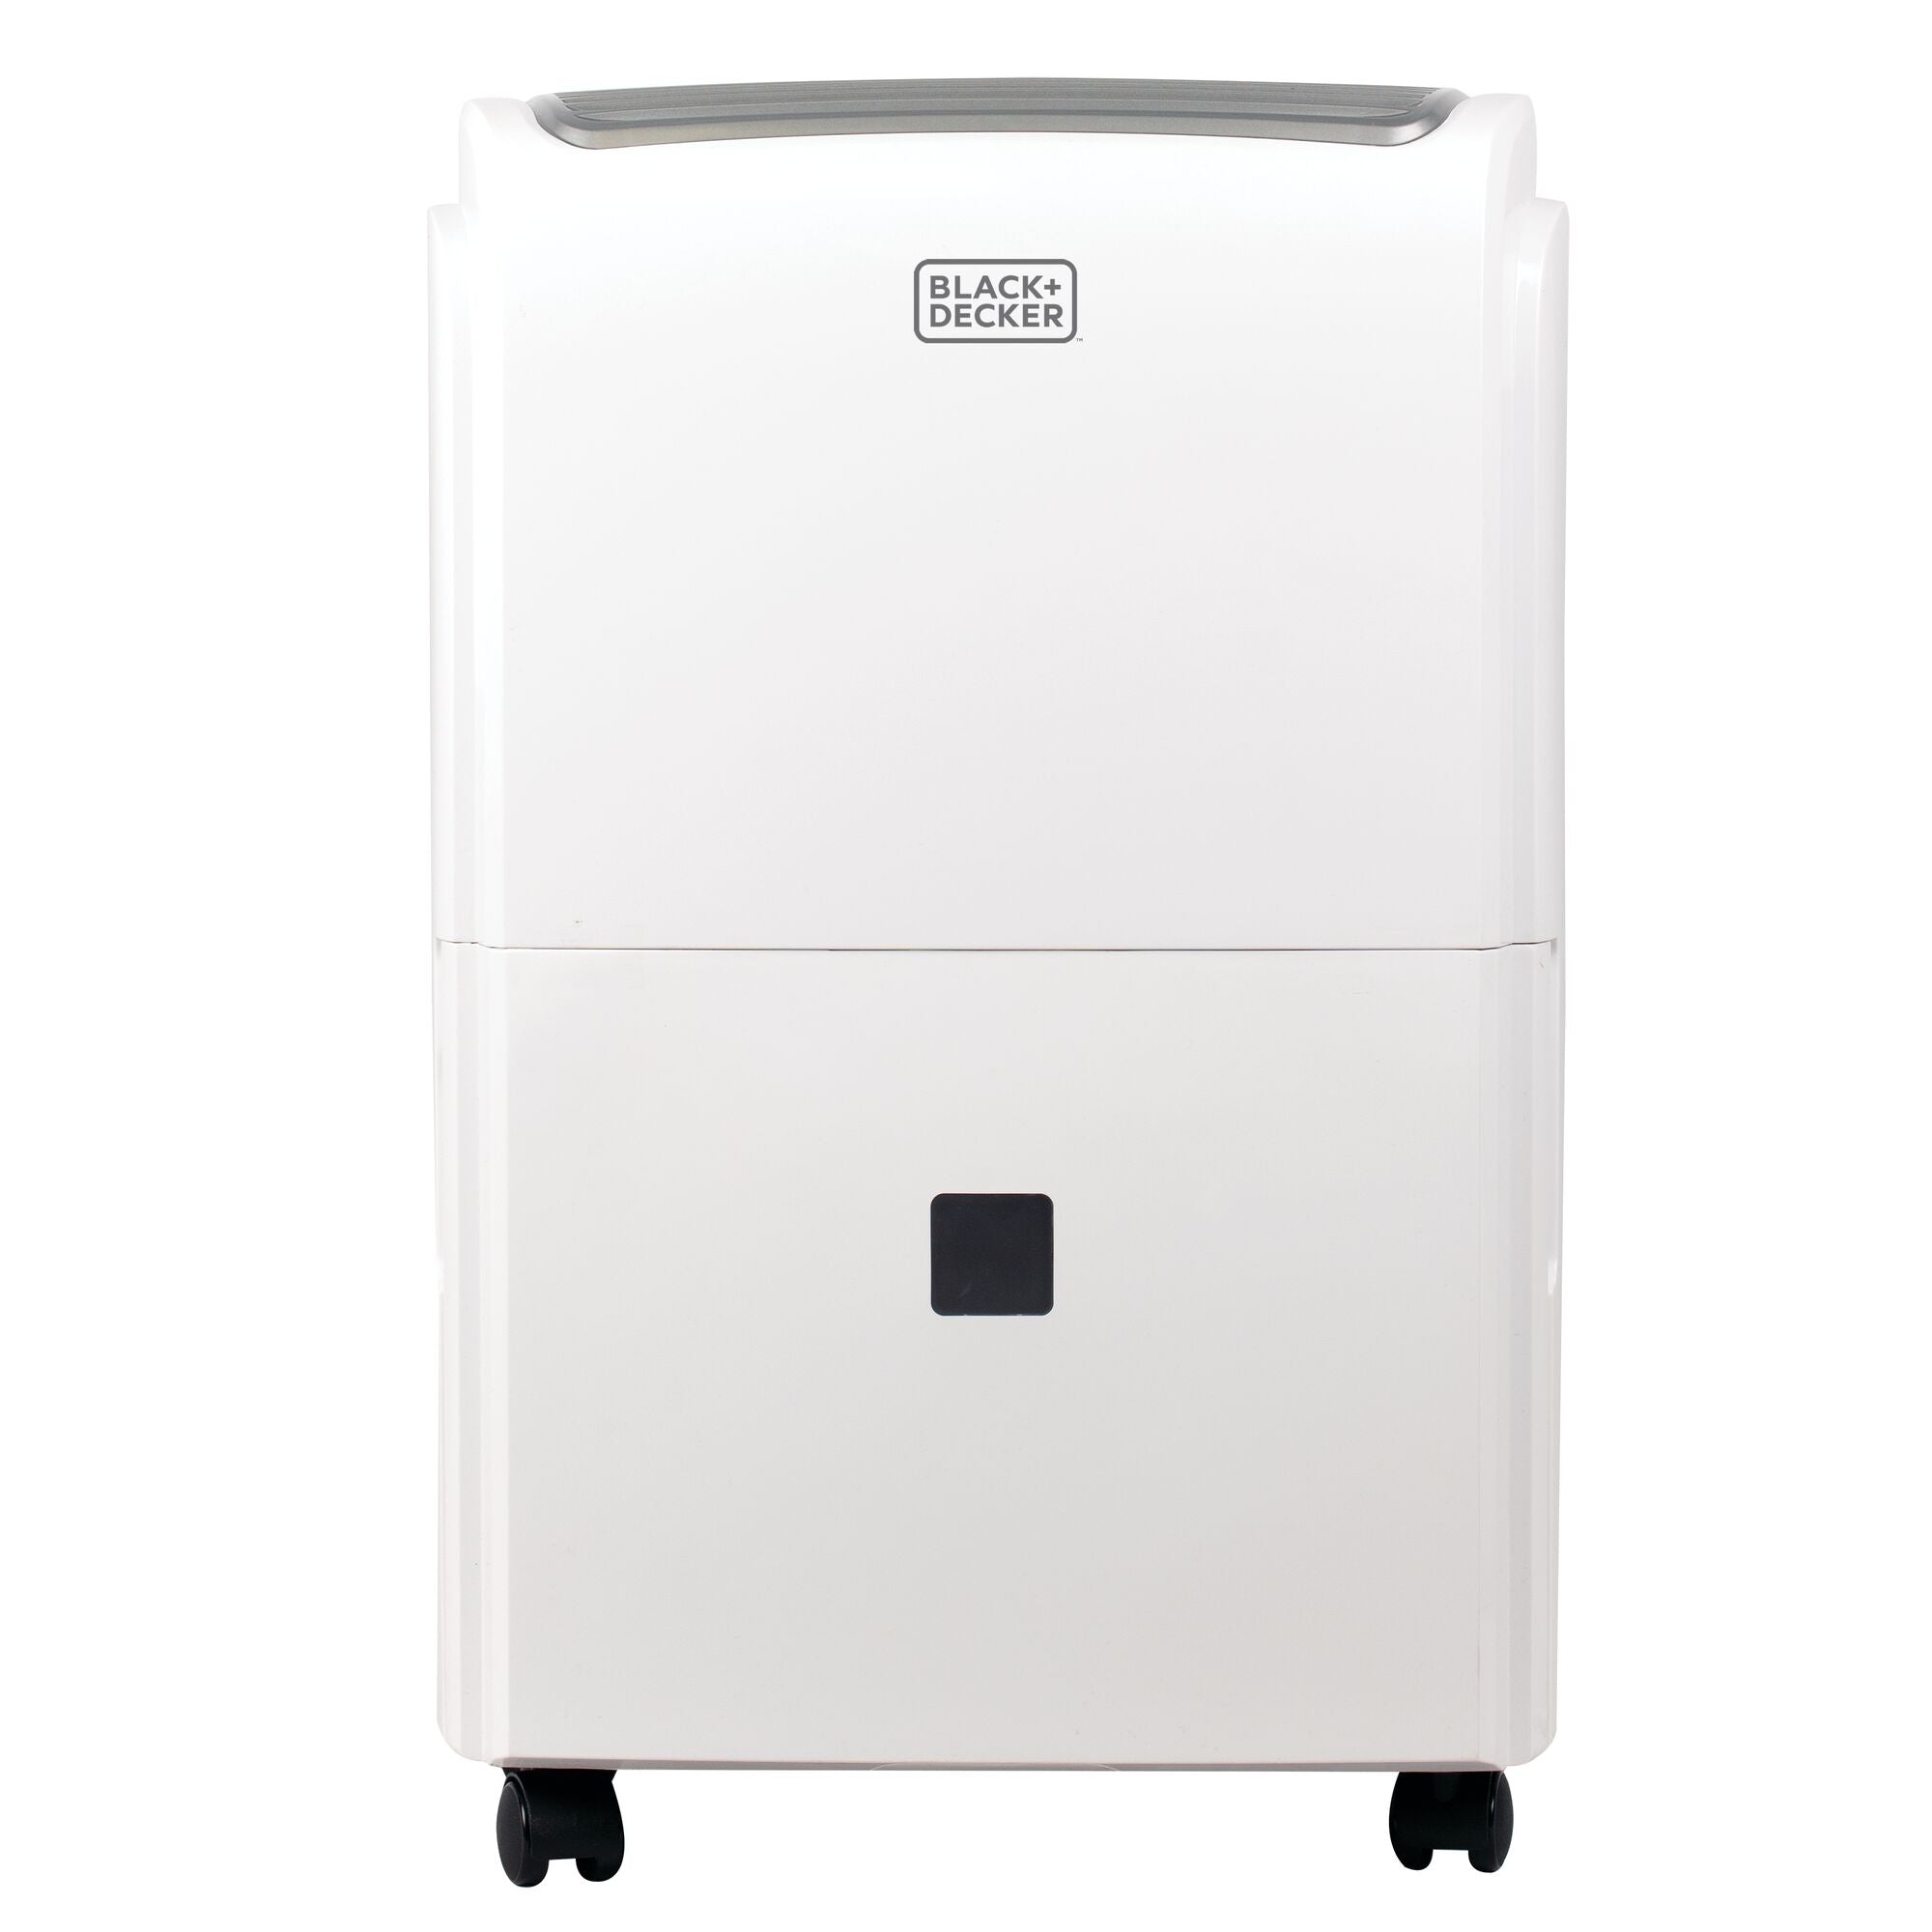 Black+decker 1500 sq. ft. dehumidifier review: is it worth the